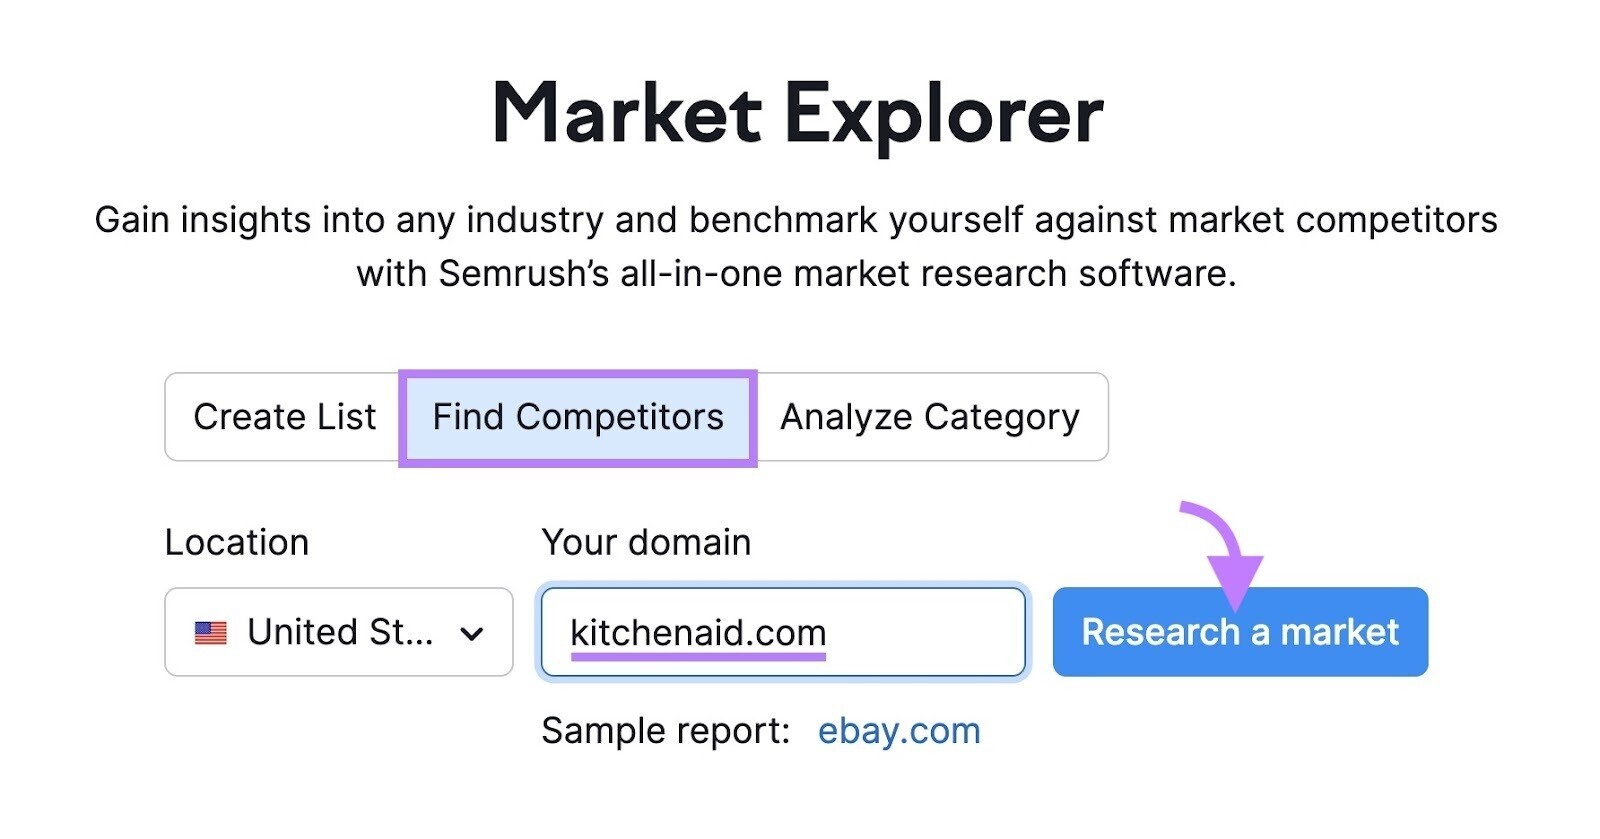 use “Find Competitors” option in Market Explorer tool to find your SEO competitors